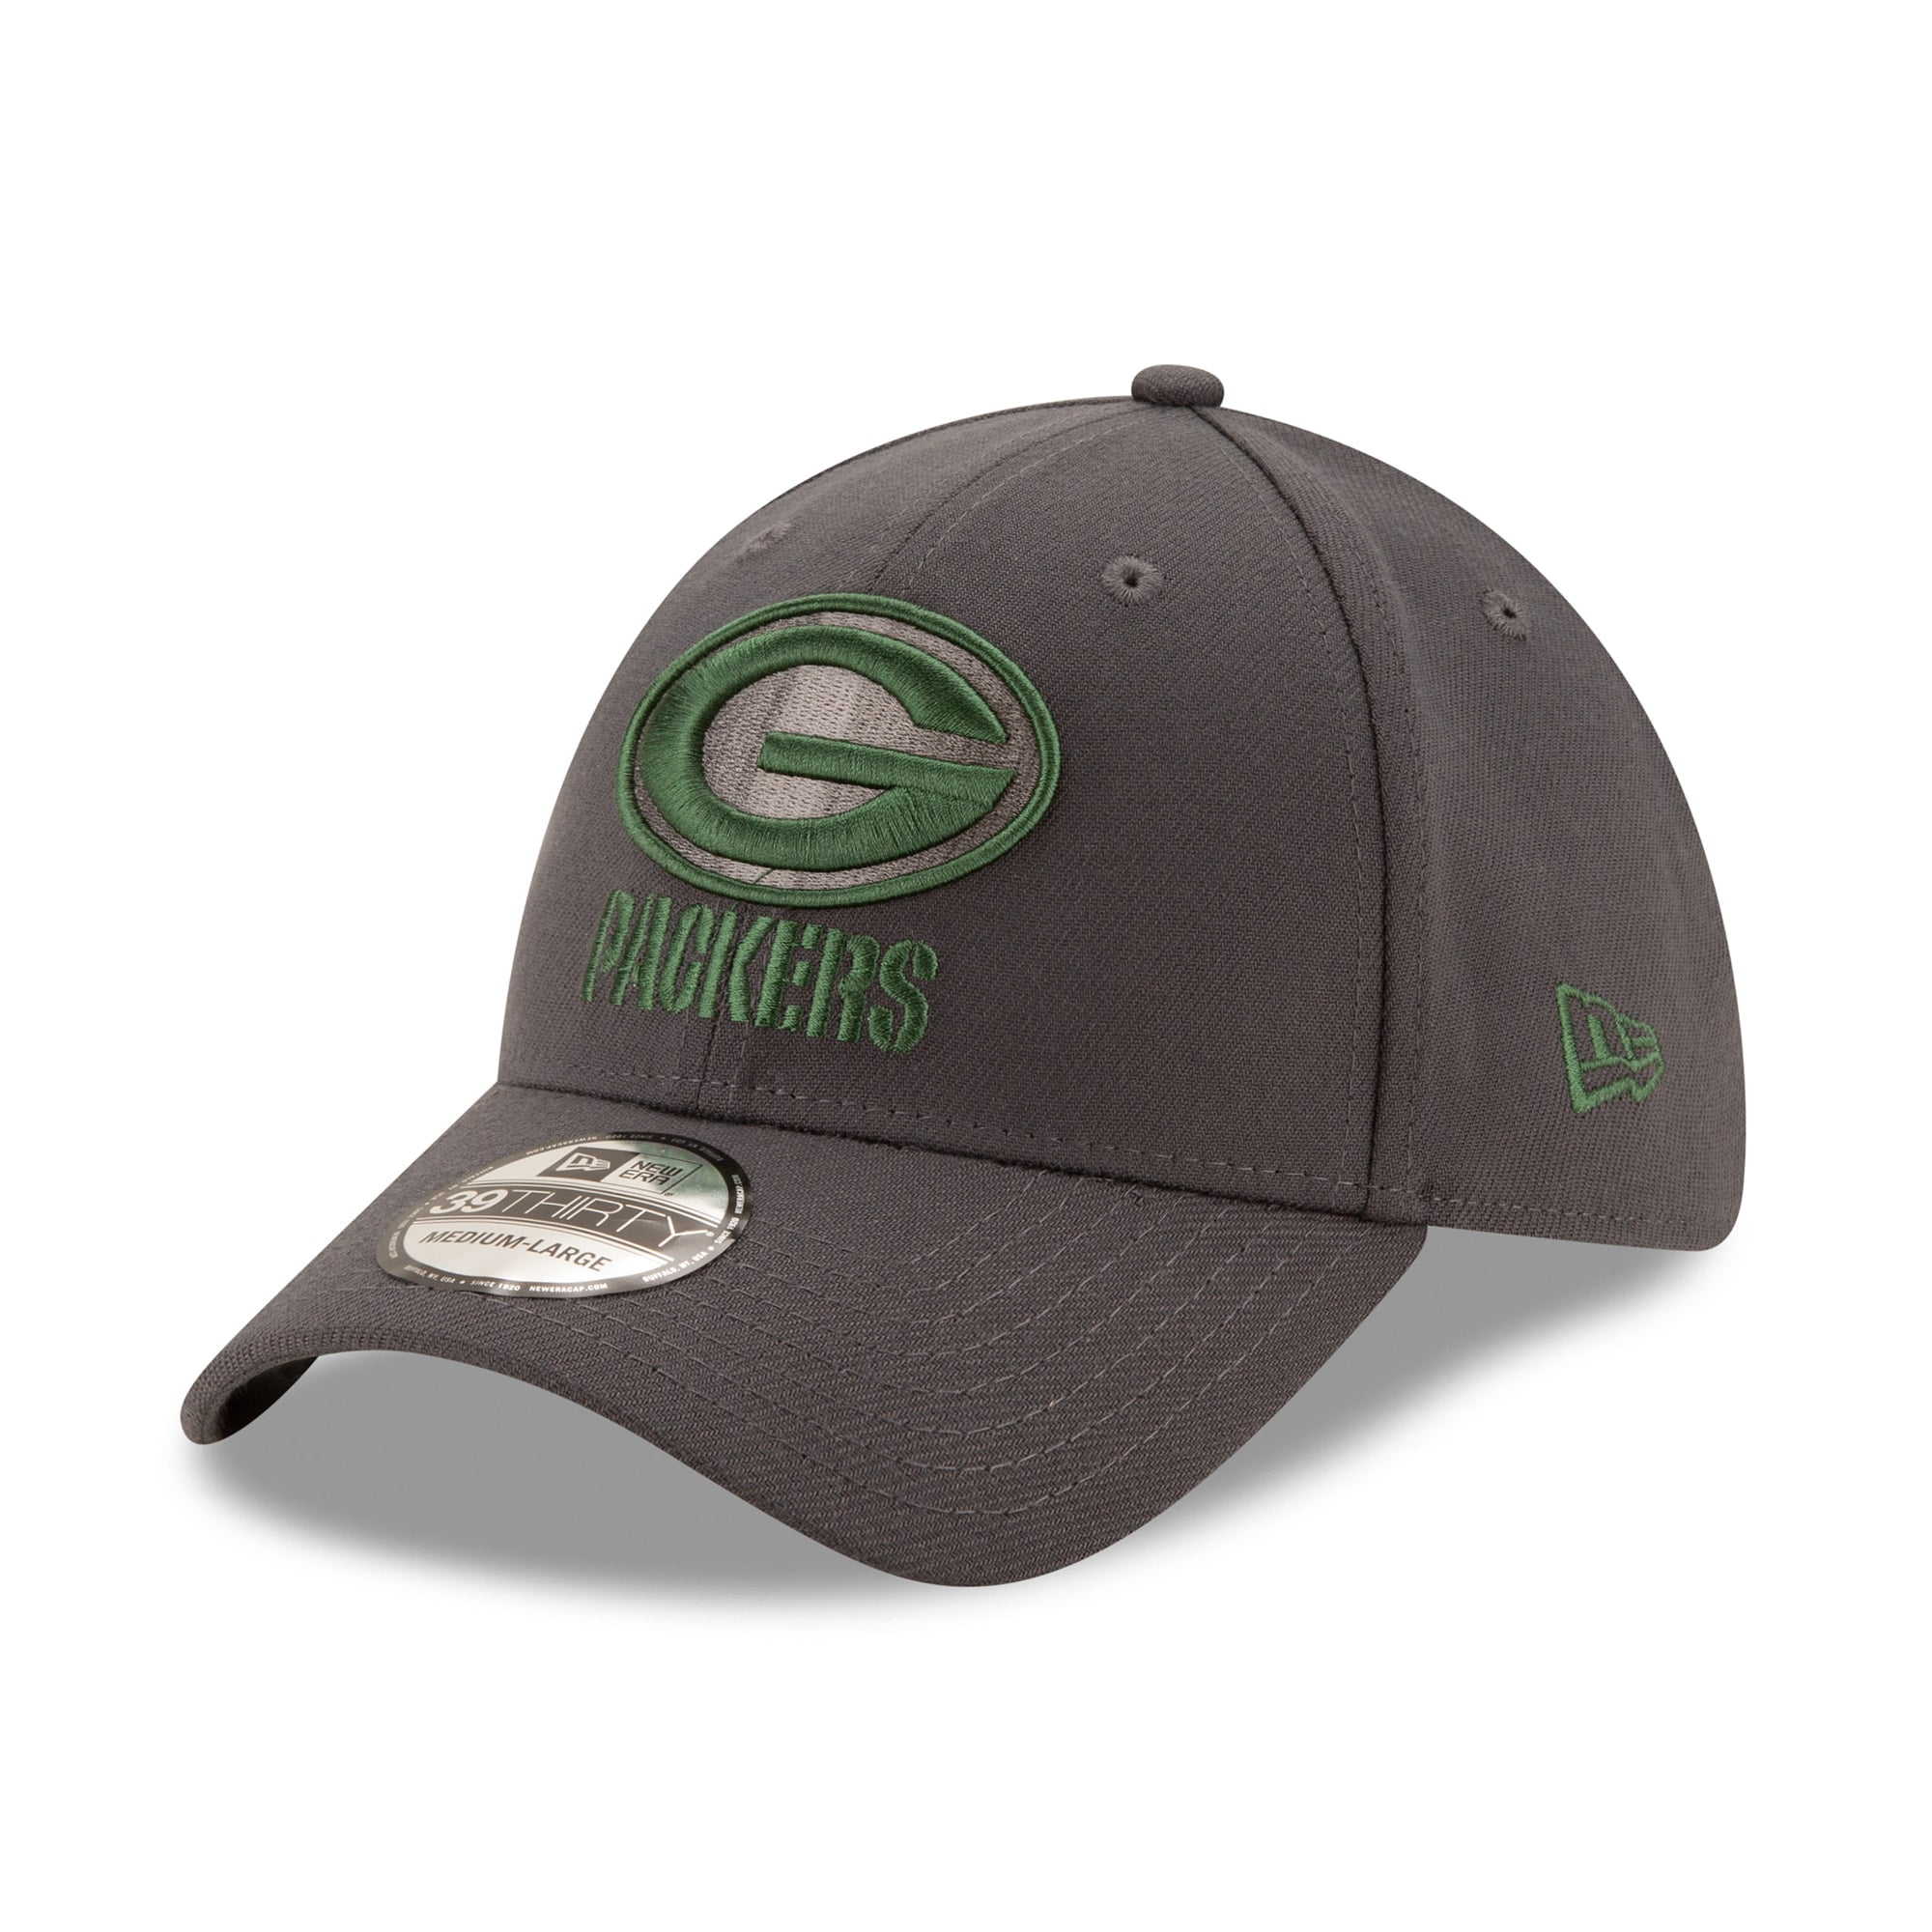 New Era 39Thirty Cap Salute to Service Green Bay Packers 